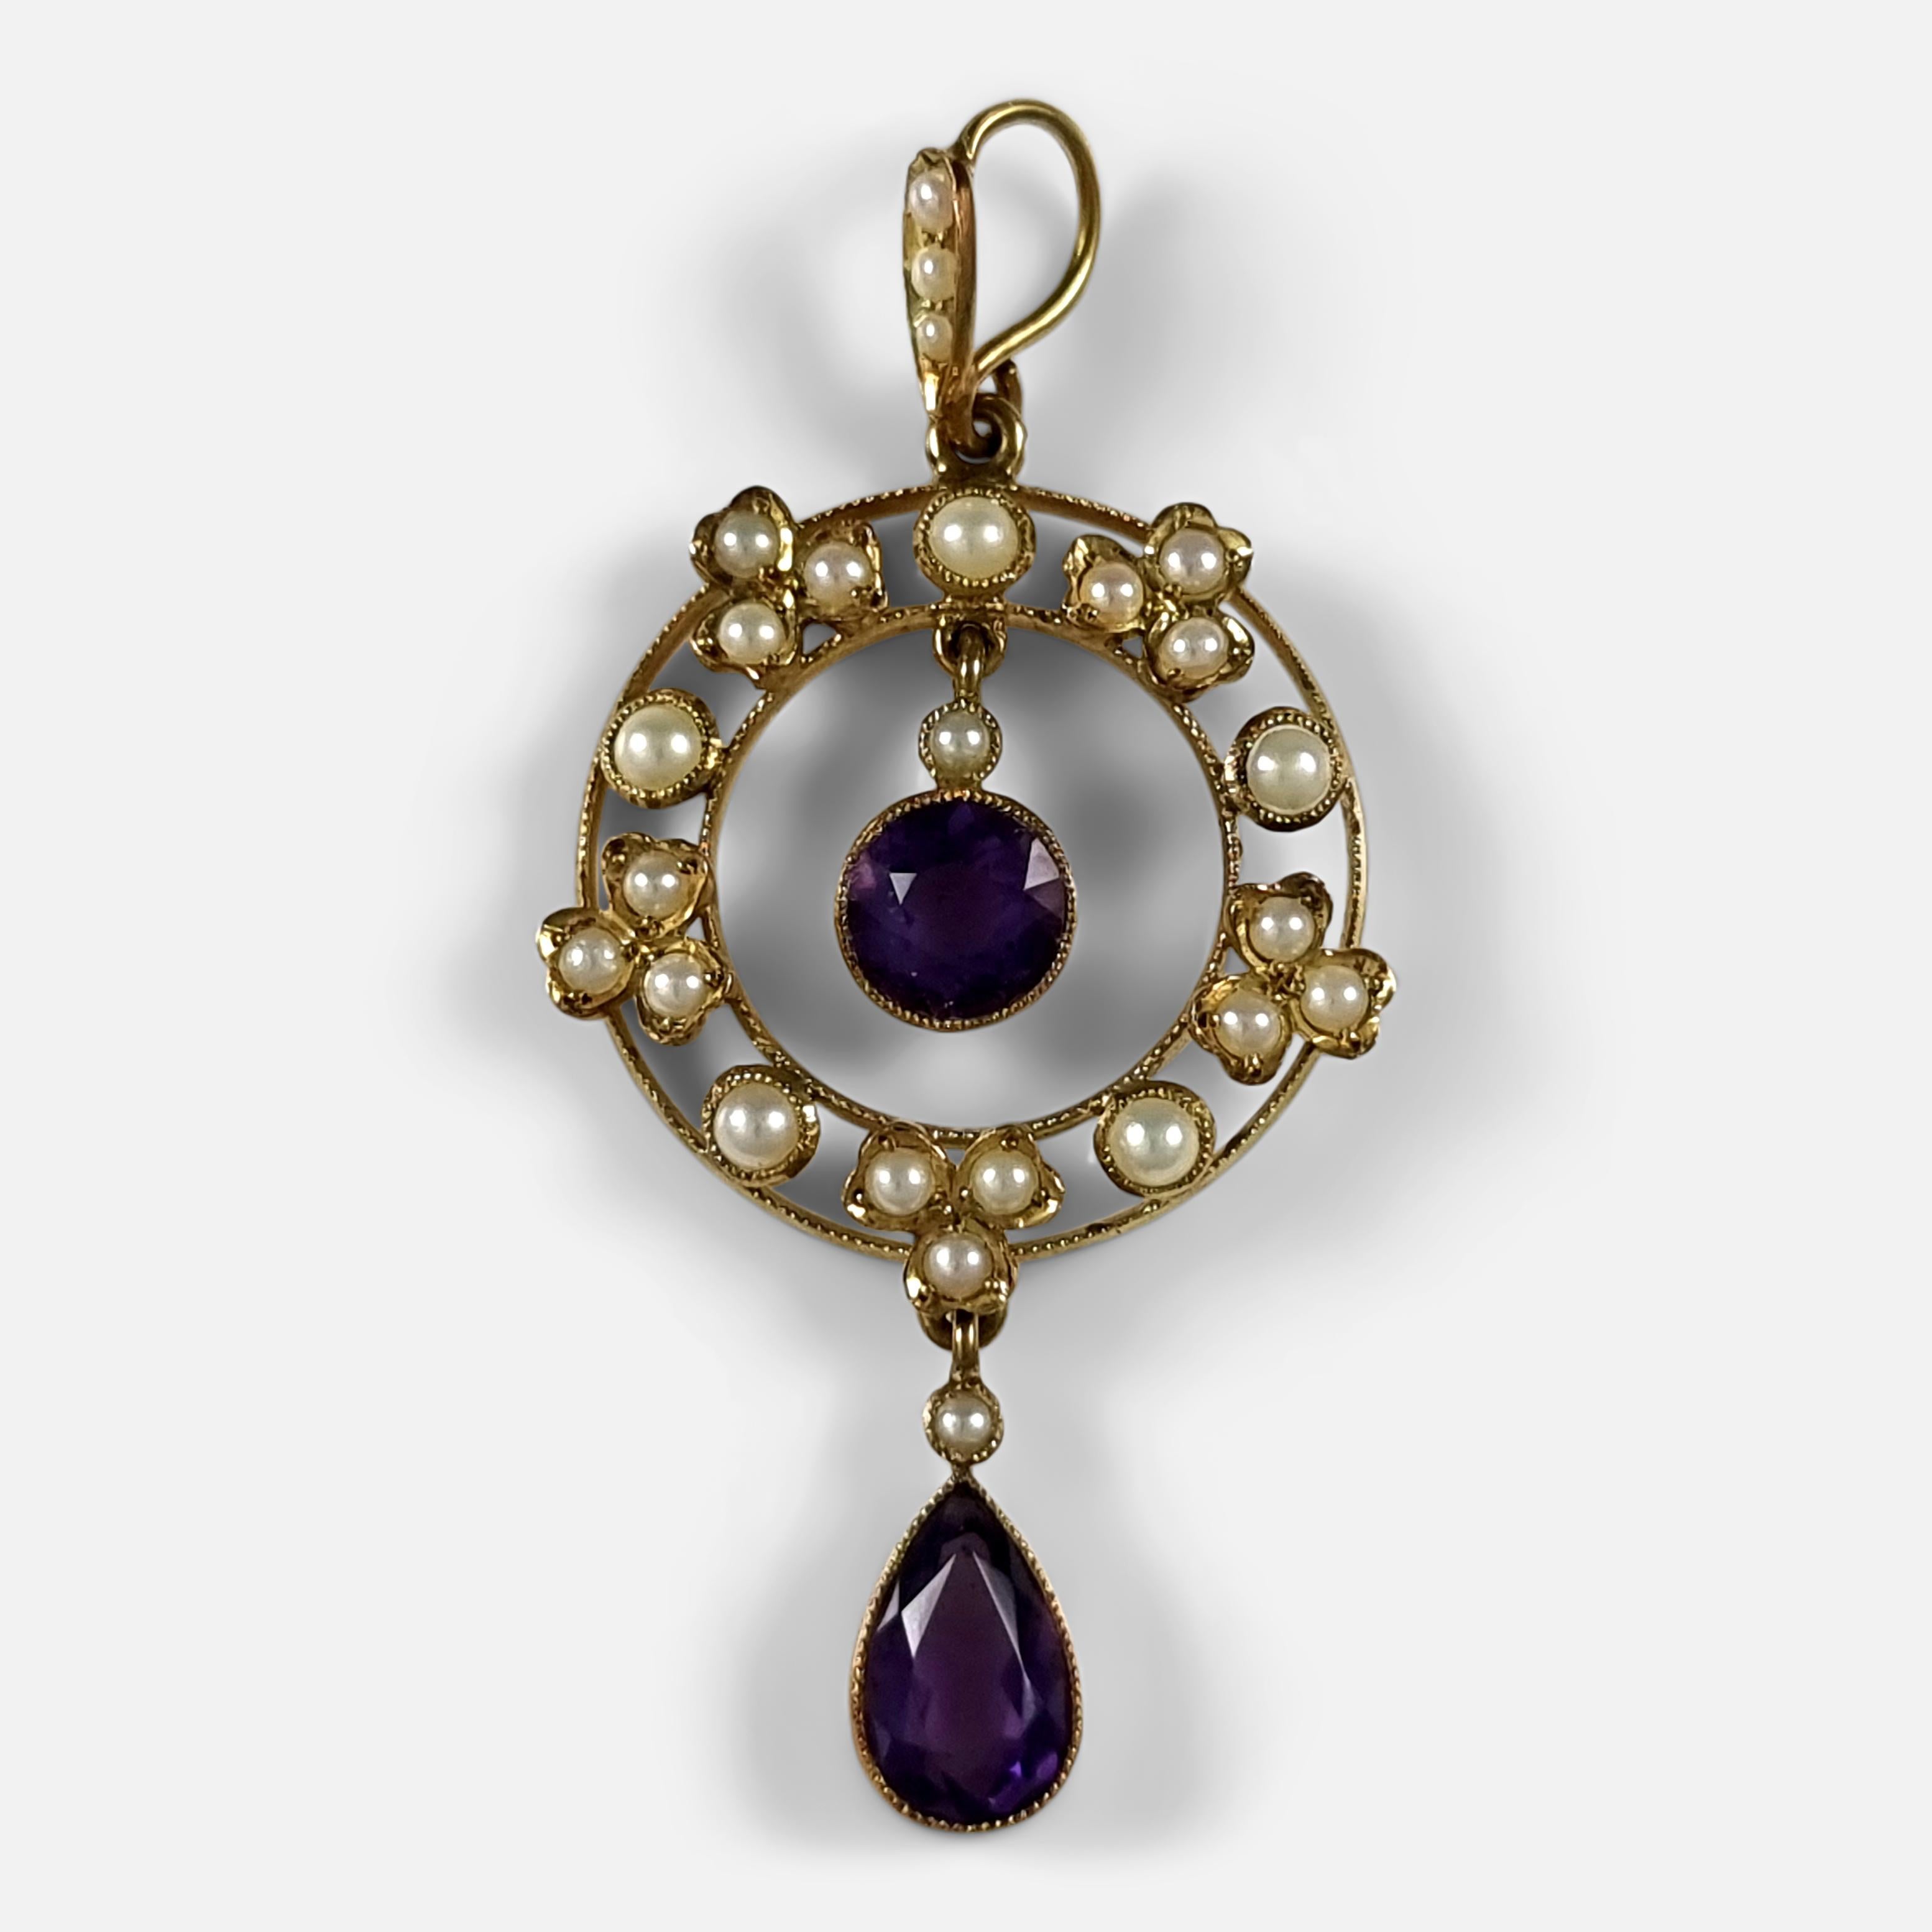 An Edwardian 15ct yellow gold amethyst and seed pearl pendant. 

The pendant is stamped '15c' to denote 15ct gold fineness.

Period: - Early 20th century.

Date: - Circa 1905.

Measurement: -  4.4cm (height including bale) x 2.0cm (width) x 0.4cm